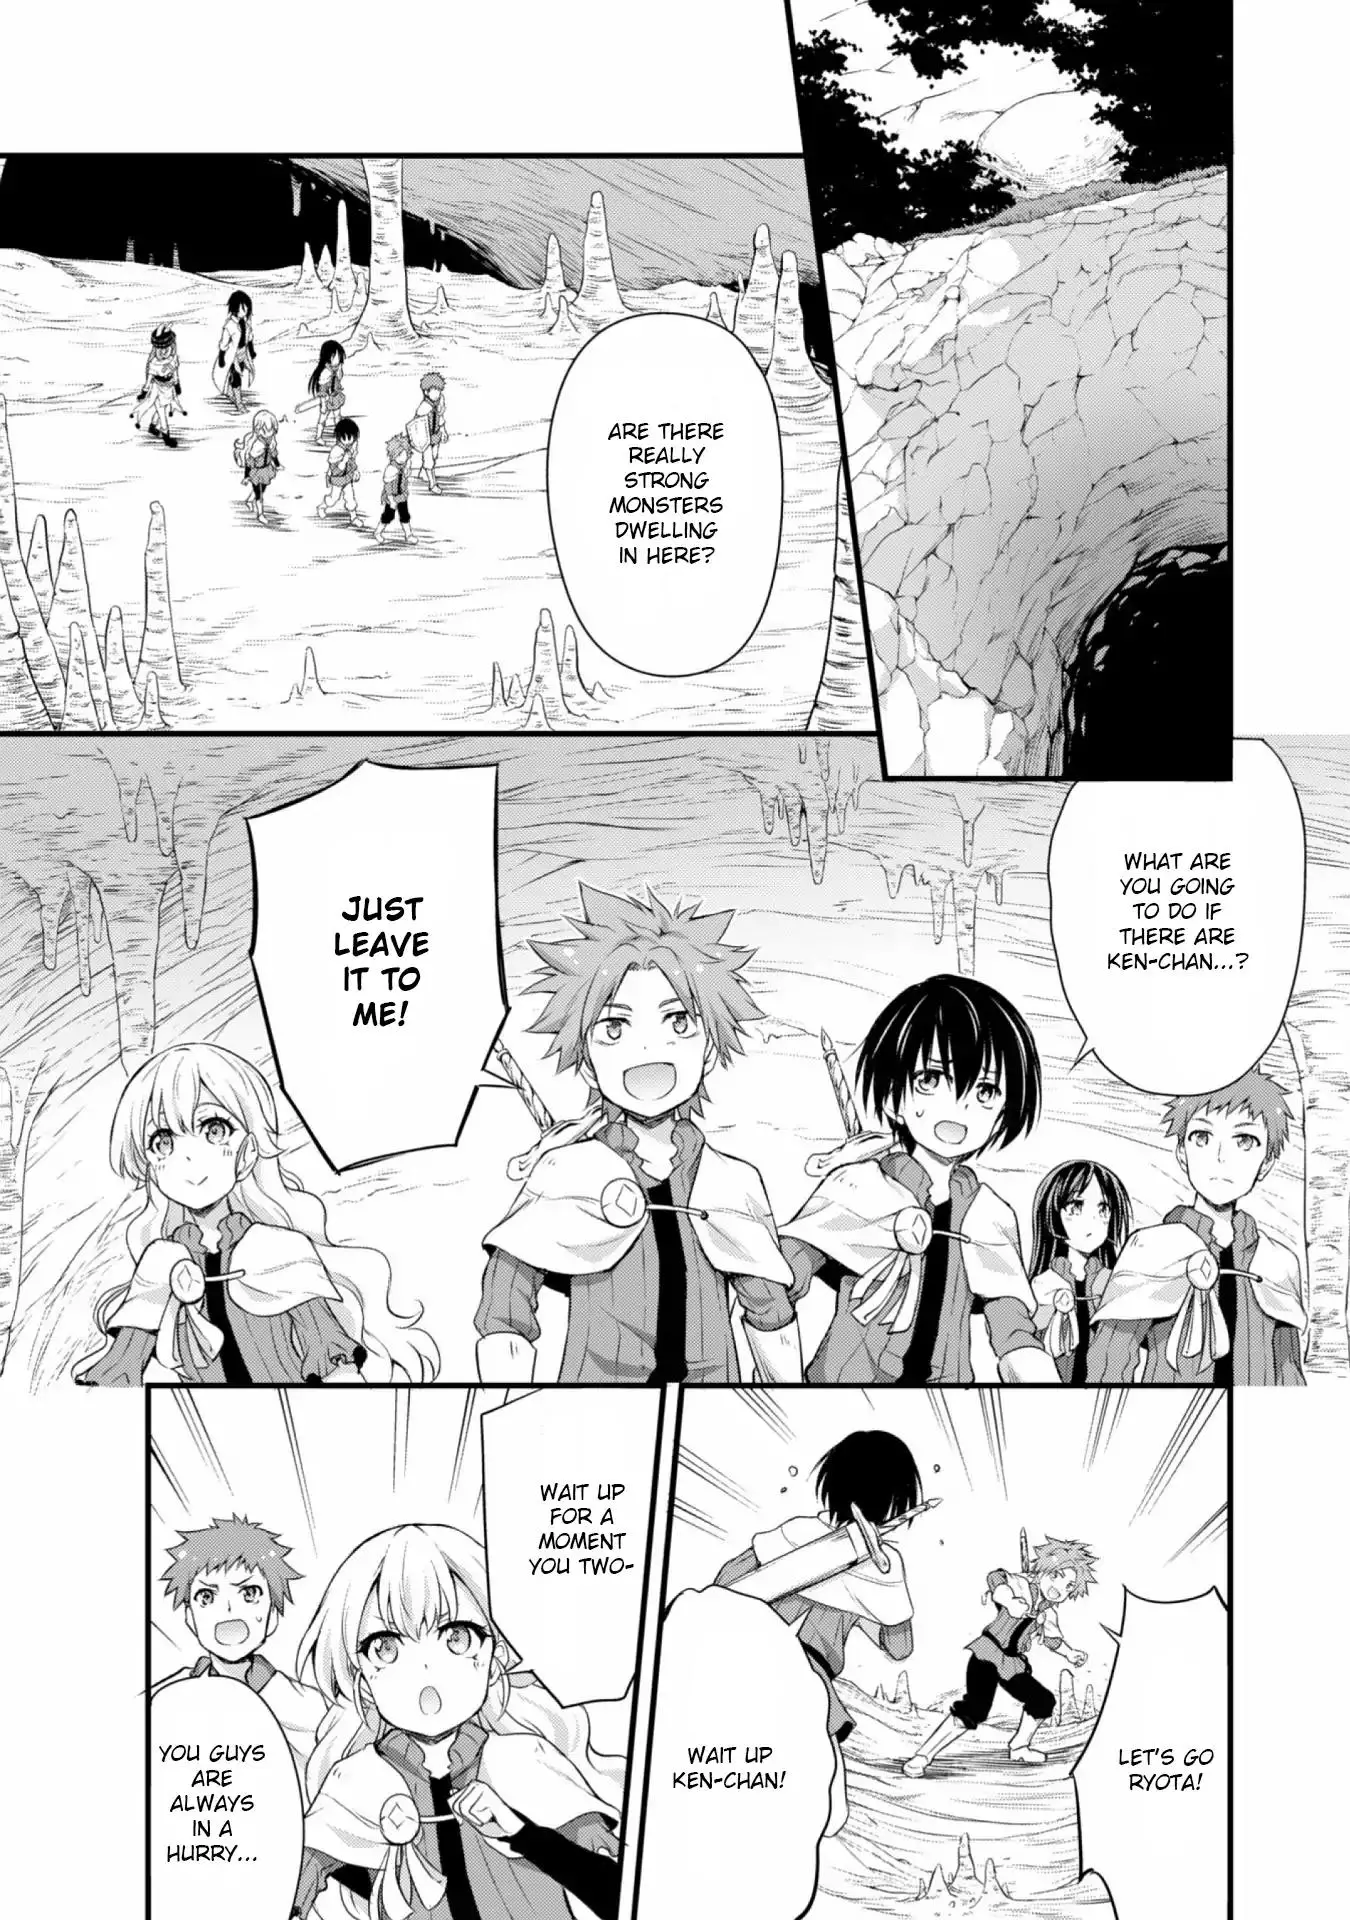 Tensei Shitara Slime Datta Ken: The Ways of Strolling in the Demon Country - 14 page 6